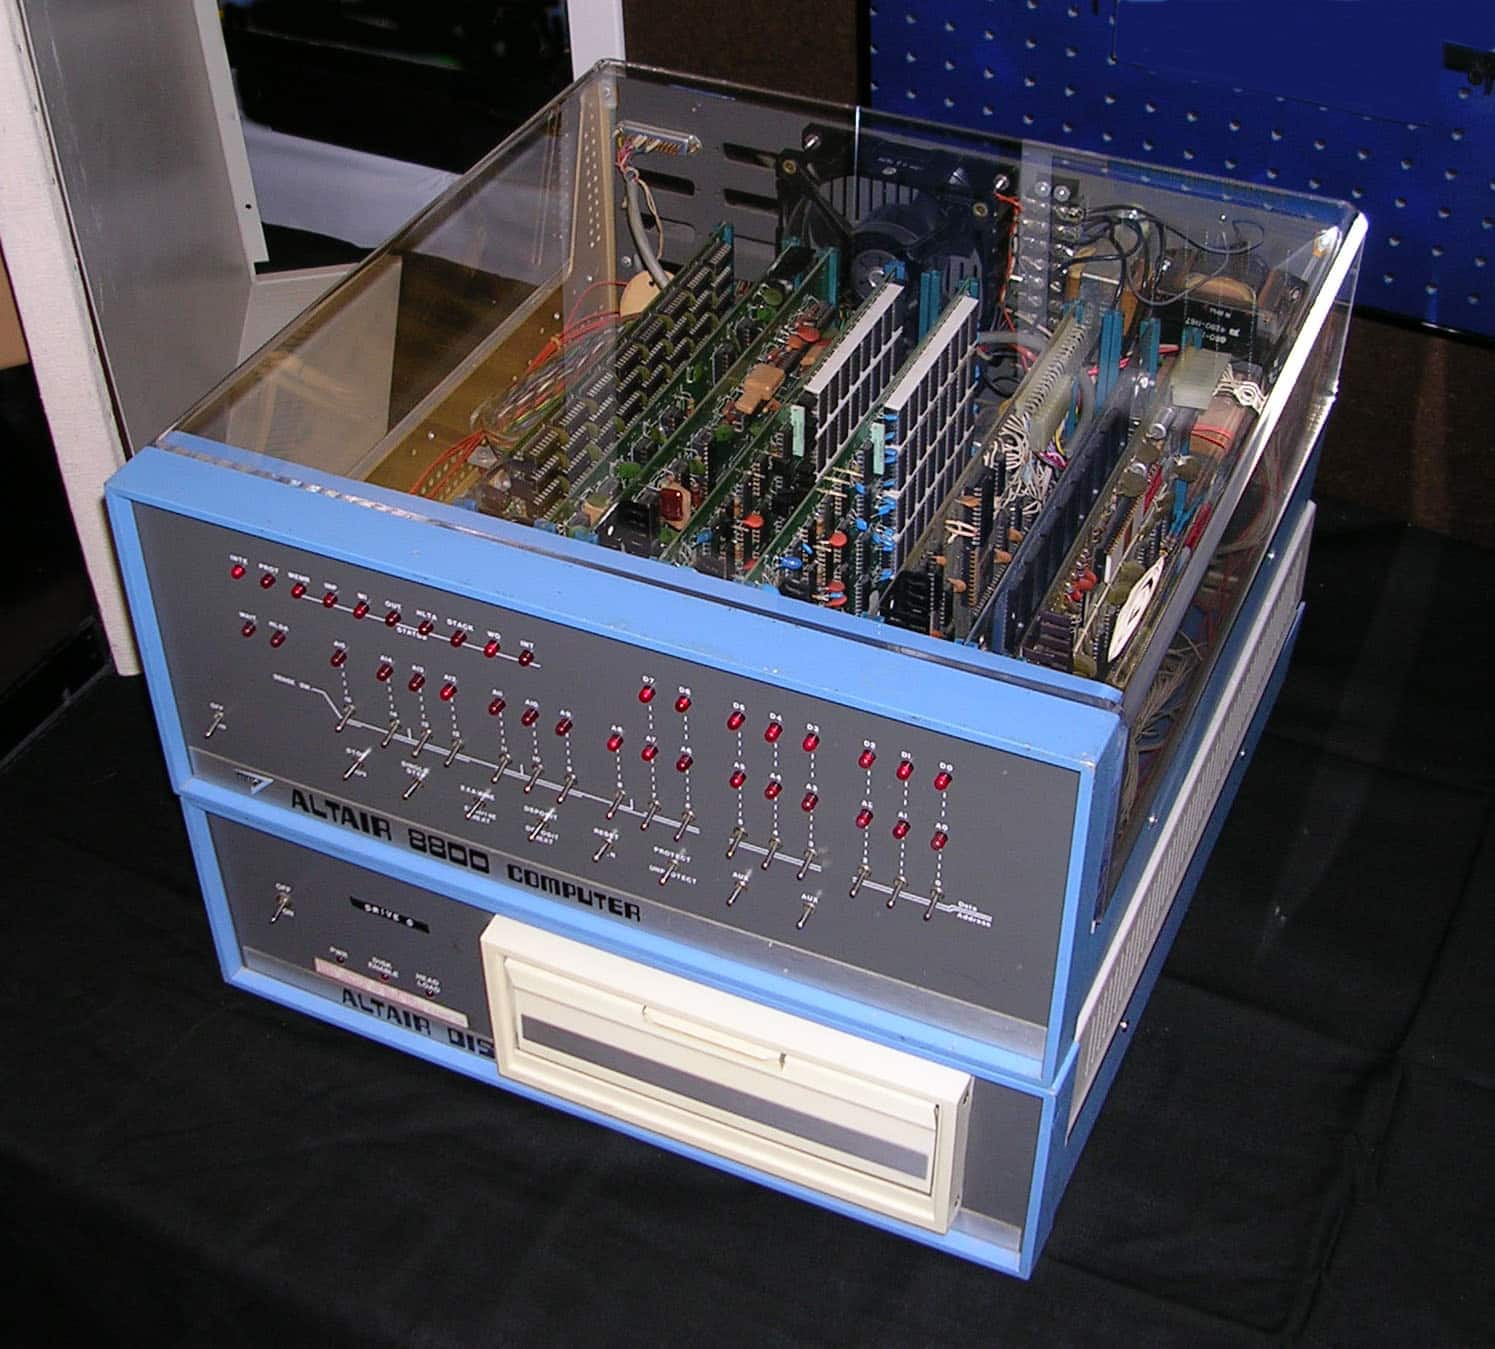 Biography of Bill Gates - Altair 8800 Computer